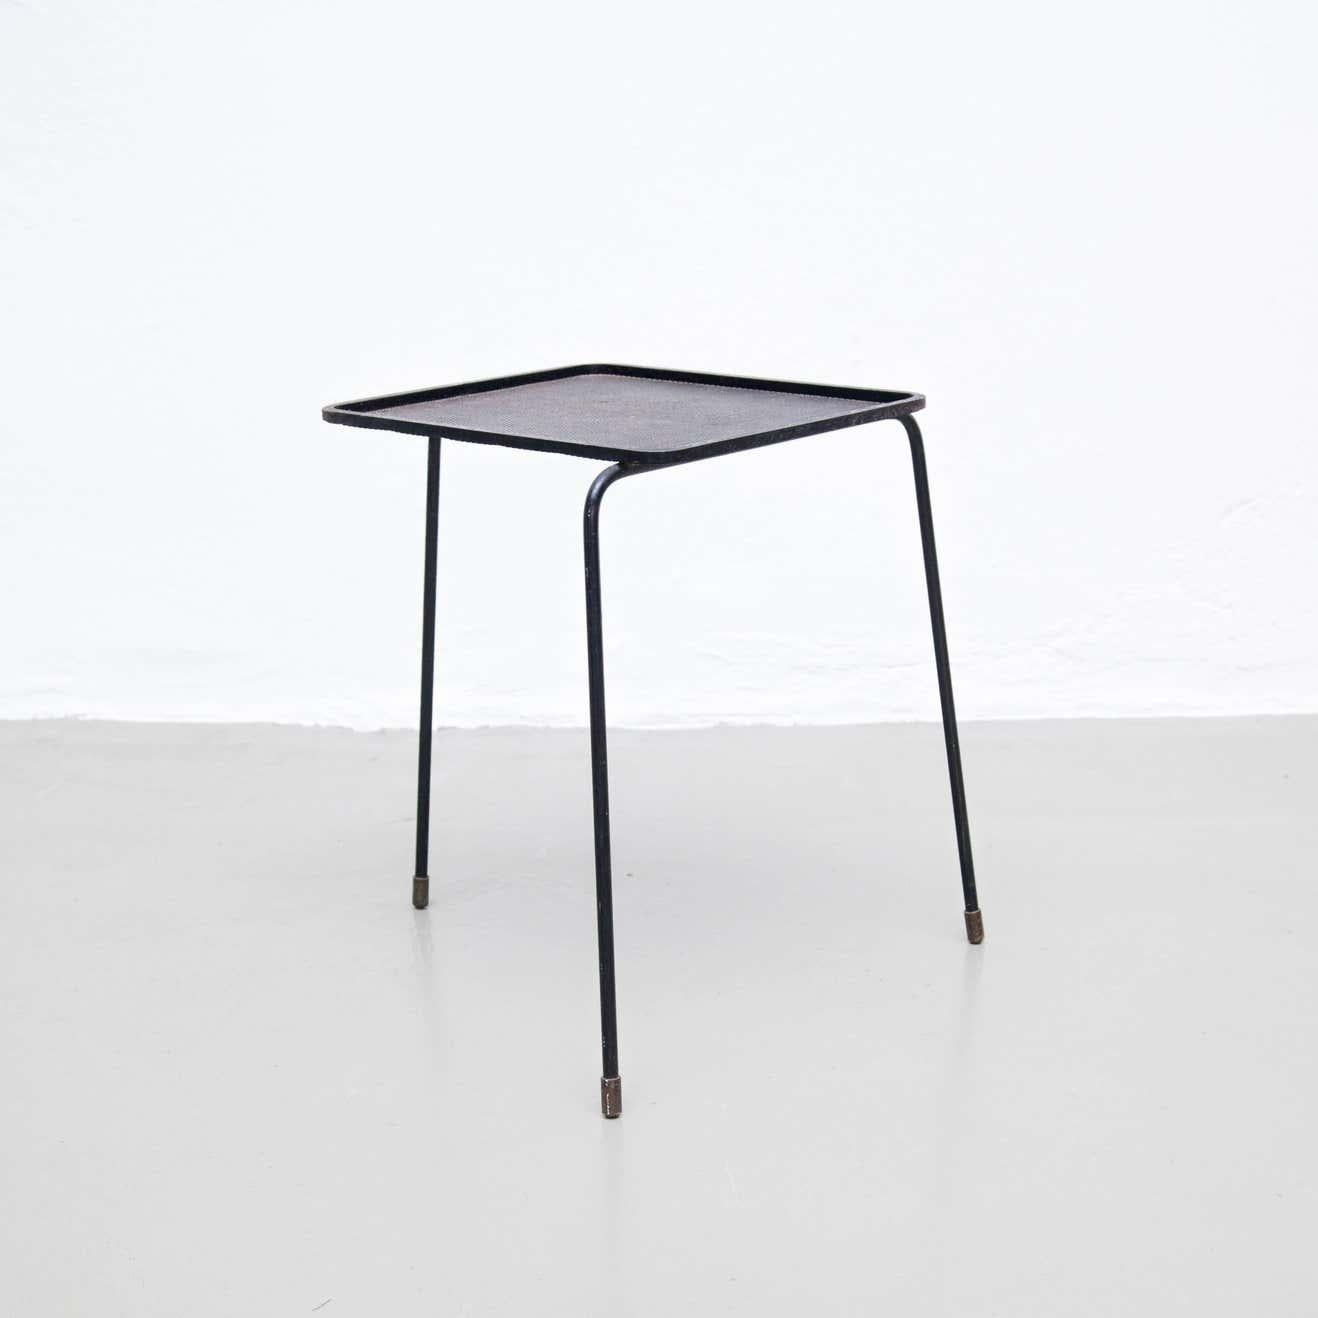 Soumba coffee and side table designed by Mathieu Matégot.
Manufactured in France, circa 1950.
Black lacquered Metal.

In good condition, with minor wear consistent with age and use, preserving a beautiful patina.

Mathieu Matégot (1910-2001)